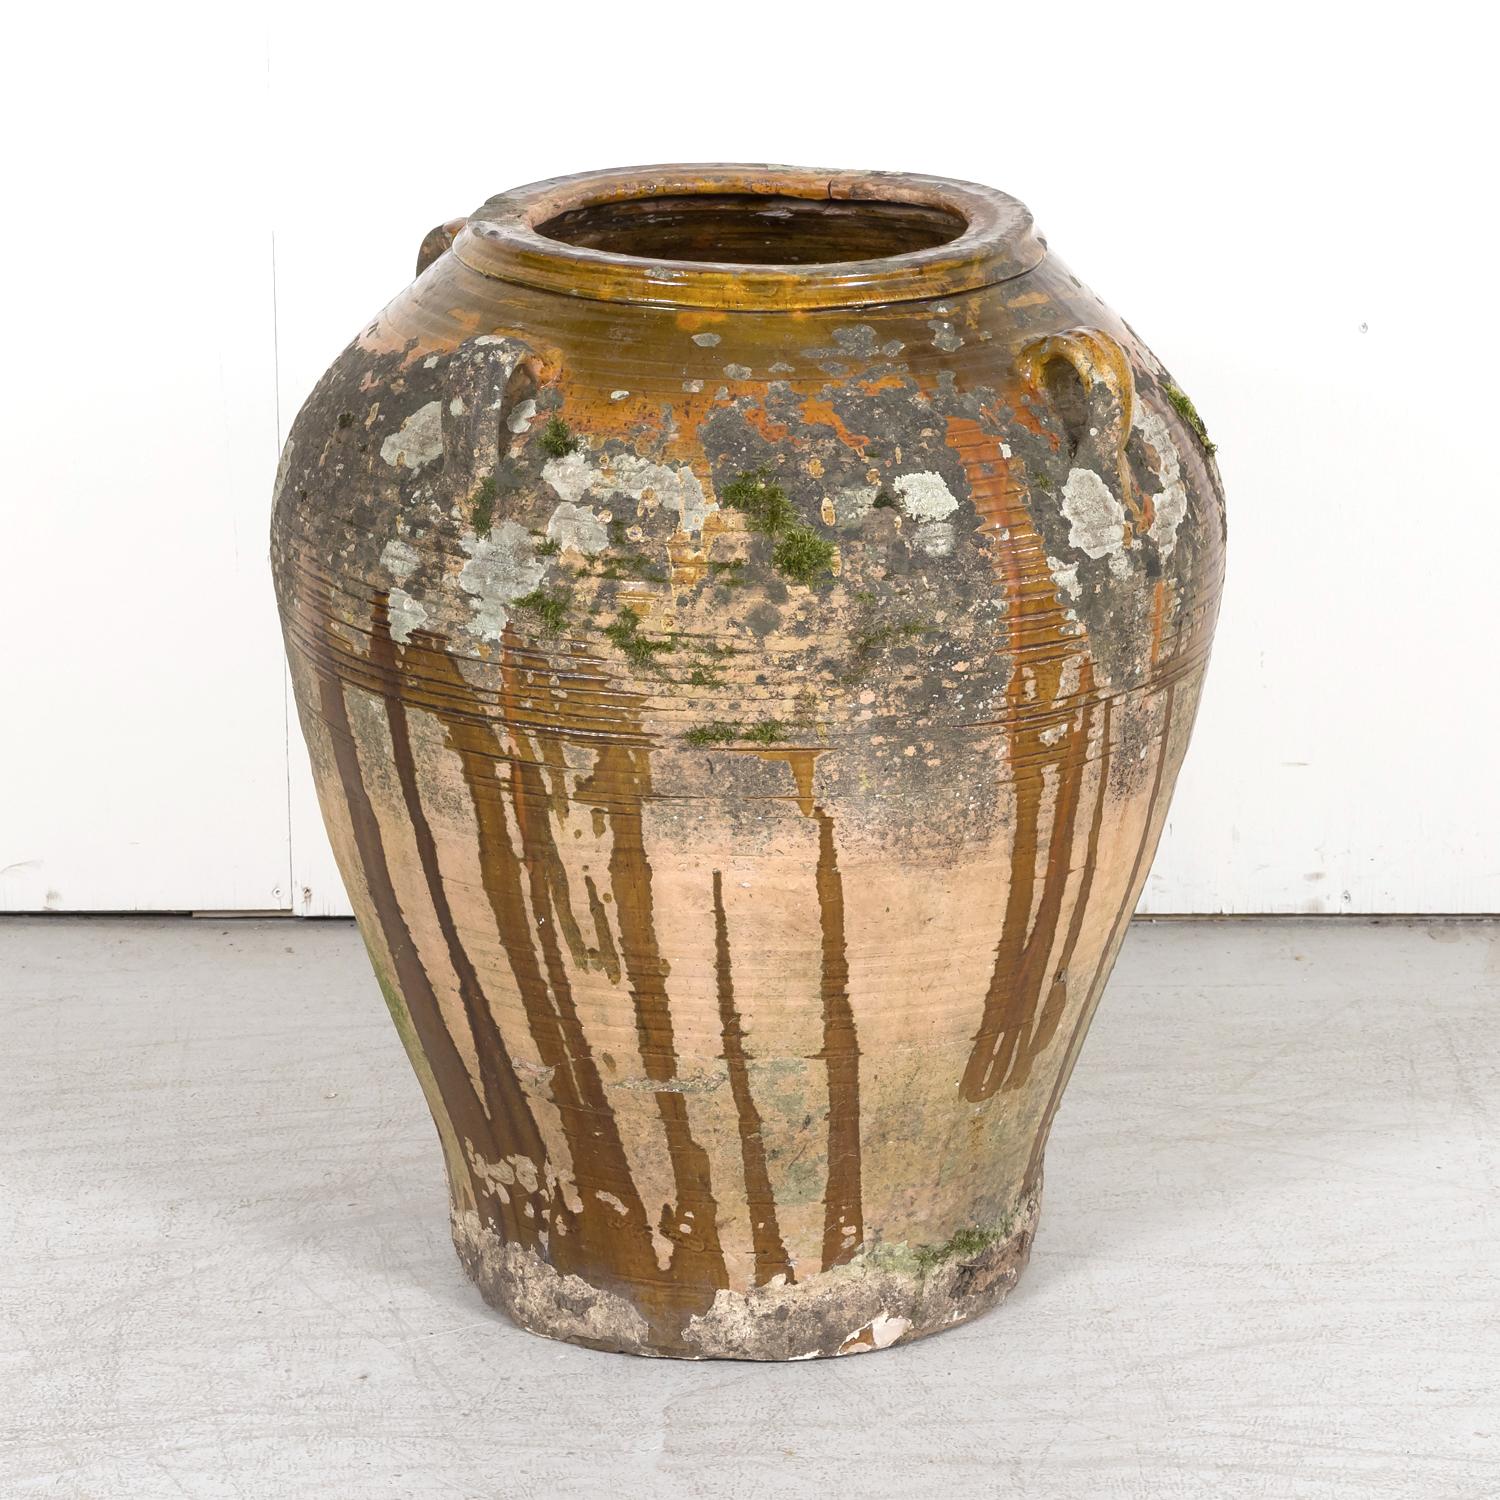 A large antique 19th century traditional Spanish terracotta orza or olive jar handmade in the province of Tarragona in the Catalonia region, circa 1880s. This beautiful jar features a dark caramel interior glaze with a semi-glazed exterior having